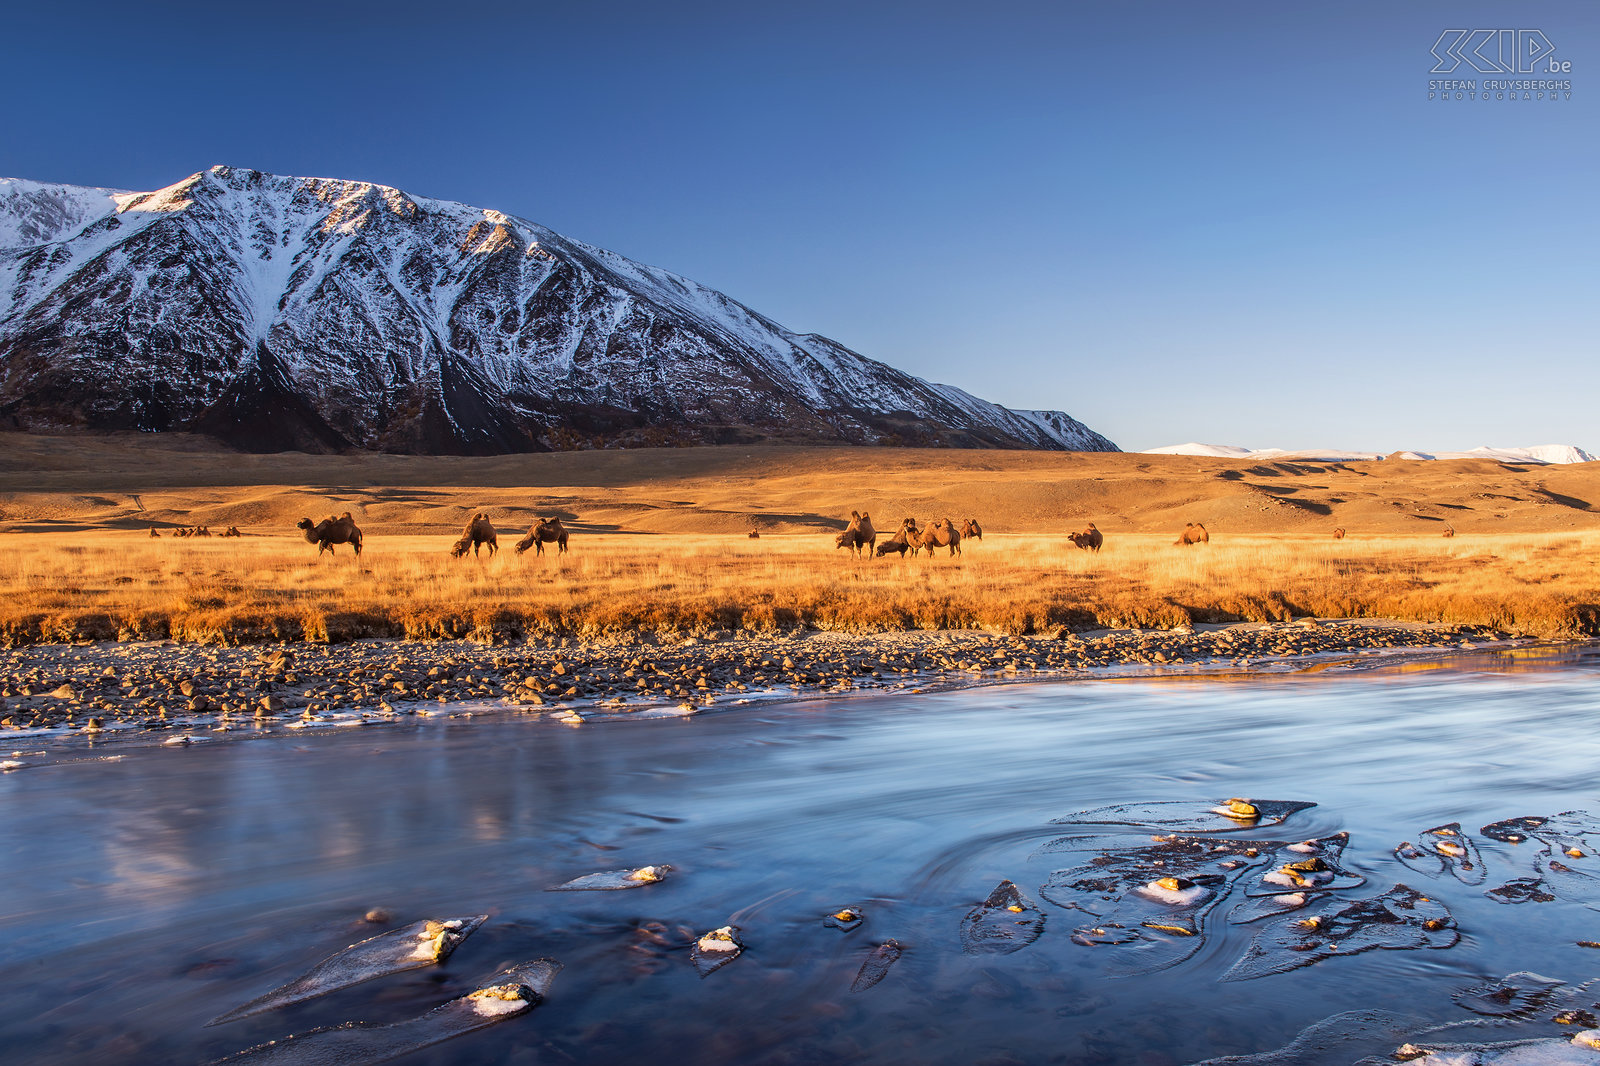 Altai Tavan Bogd - Sunrise - Camels A very cold morning in Altai Tavan Bogd national park. I woke up early before sunrise to make some long exposure shots of the river and the drifting ice. There was also a herd of bactrian camels owned by the Tuvan nomads who live in this region. So I decided to make two photos; one long exposure shot with my ND filter and a photo with a short exposure to get the camels sharp. At home I combined both photos and this is the result. Stefan Cruysberghs